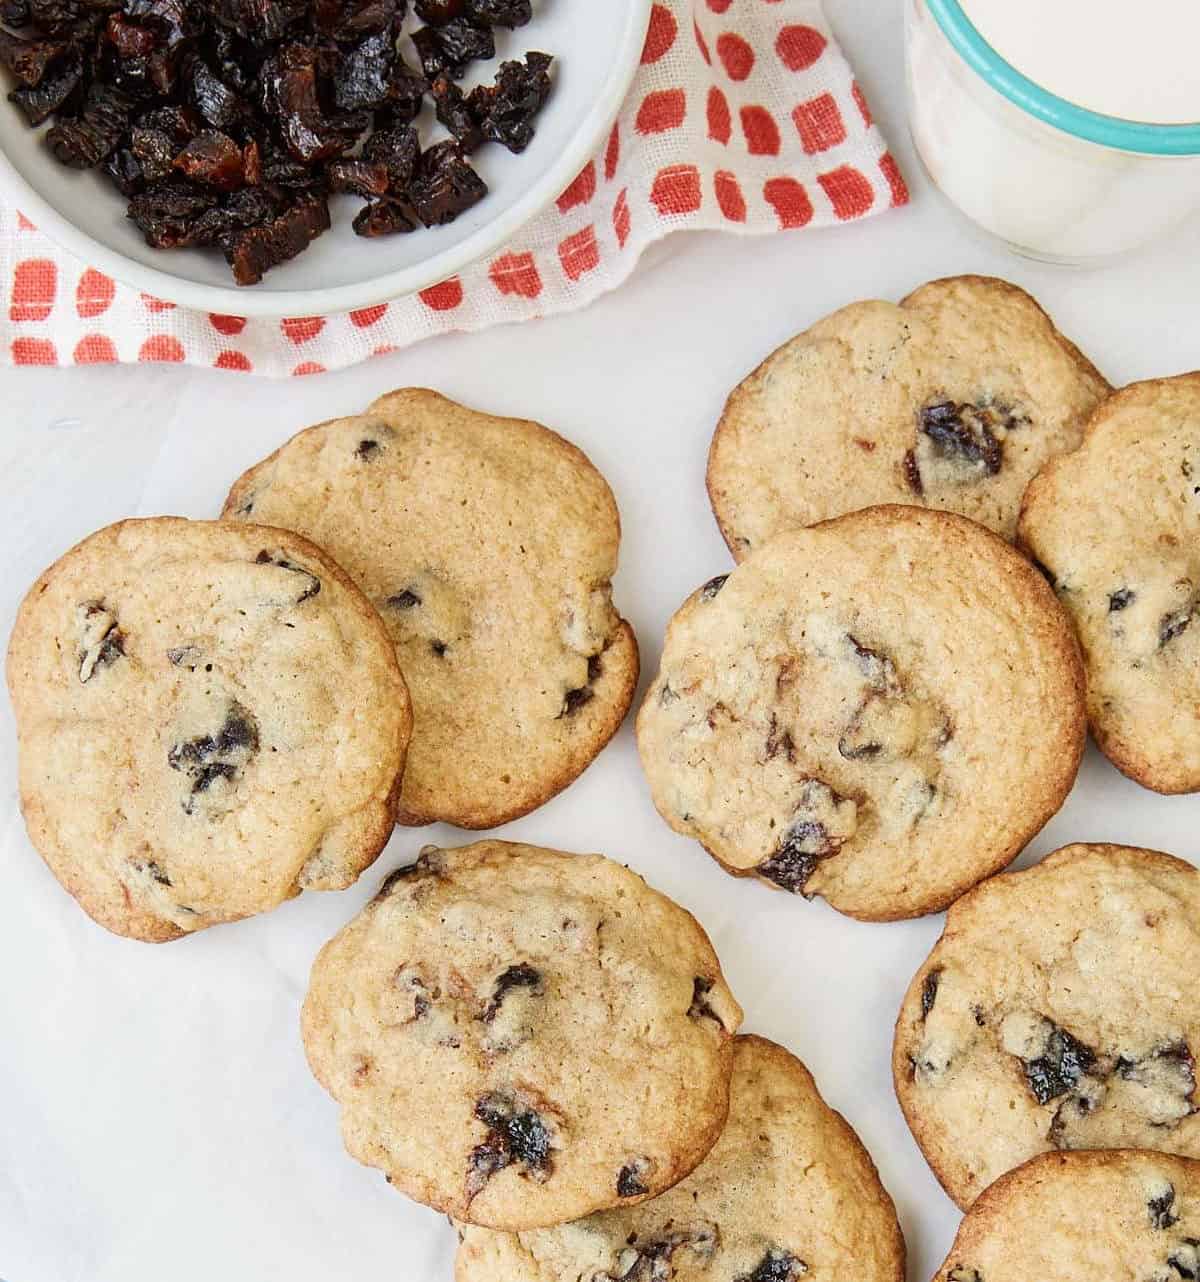 Discover the Secret to Delicious Spiced Prune Cookies